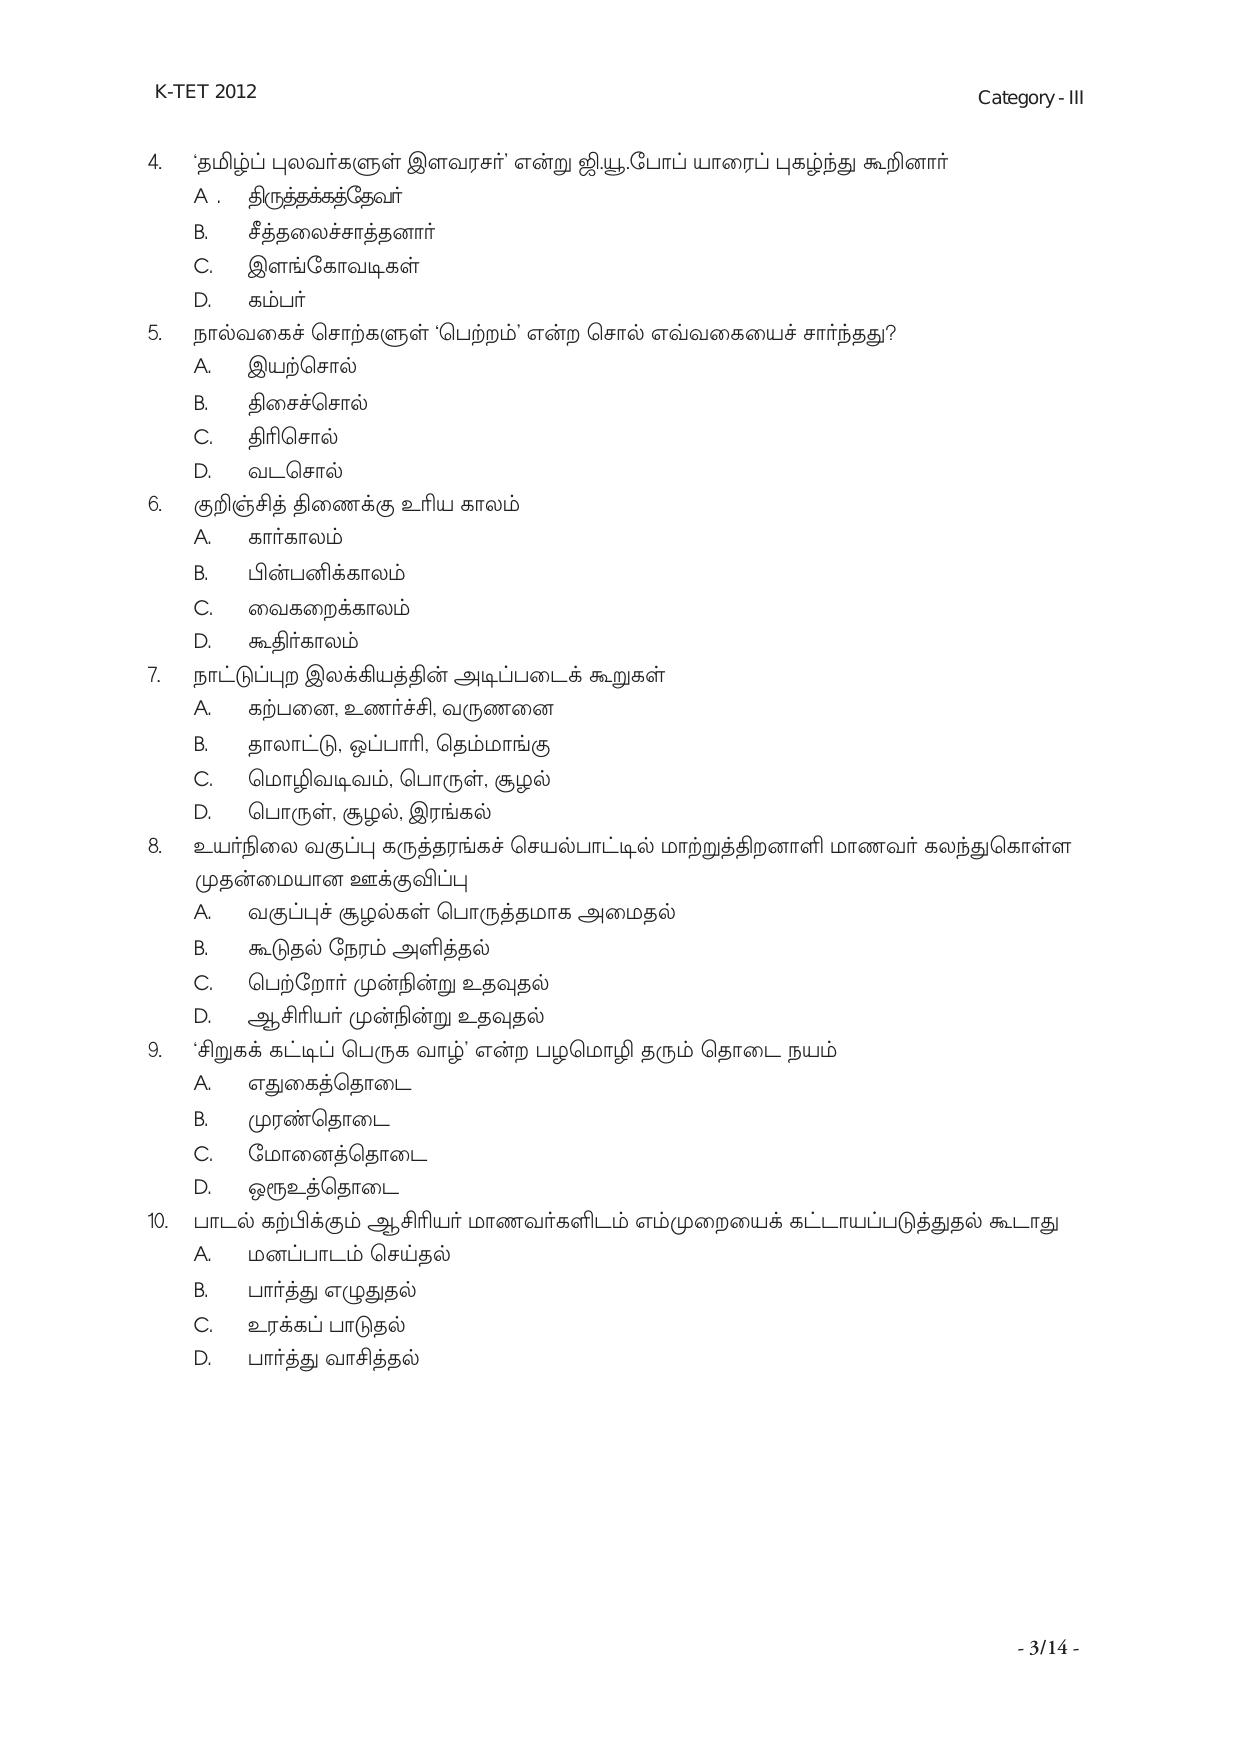 KTET Category III High School Teacher (8 to 10) Exam Previous Papers - Page 14